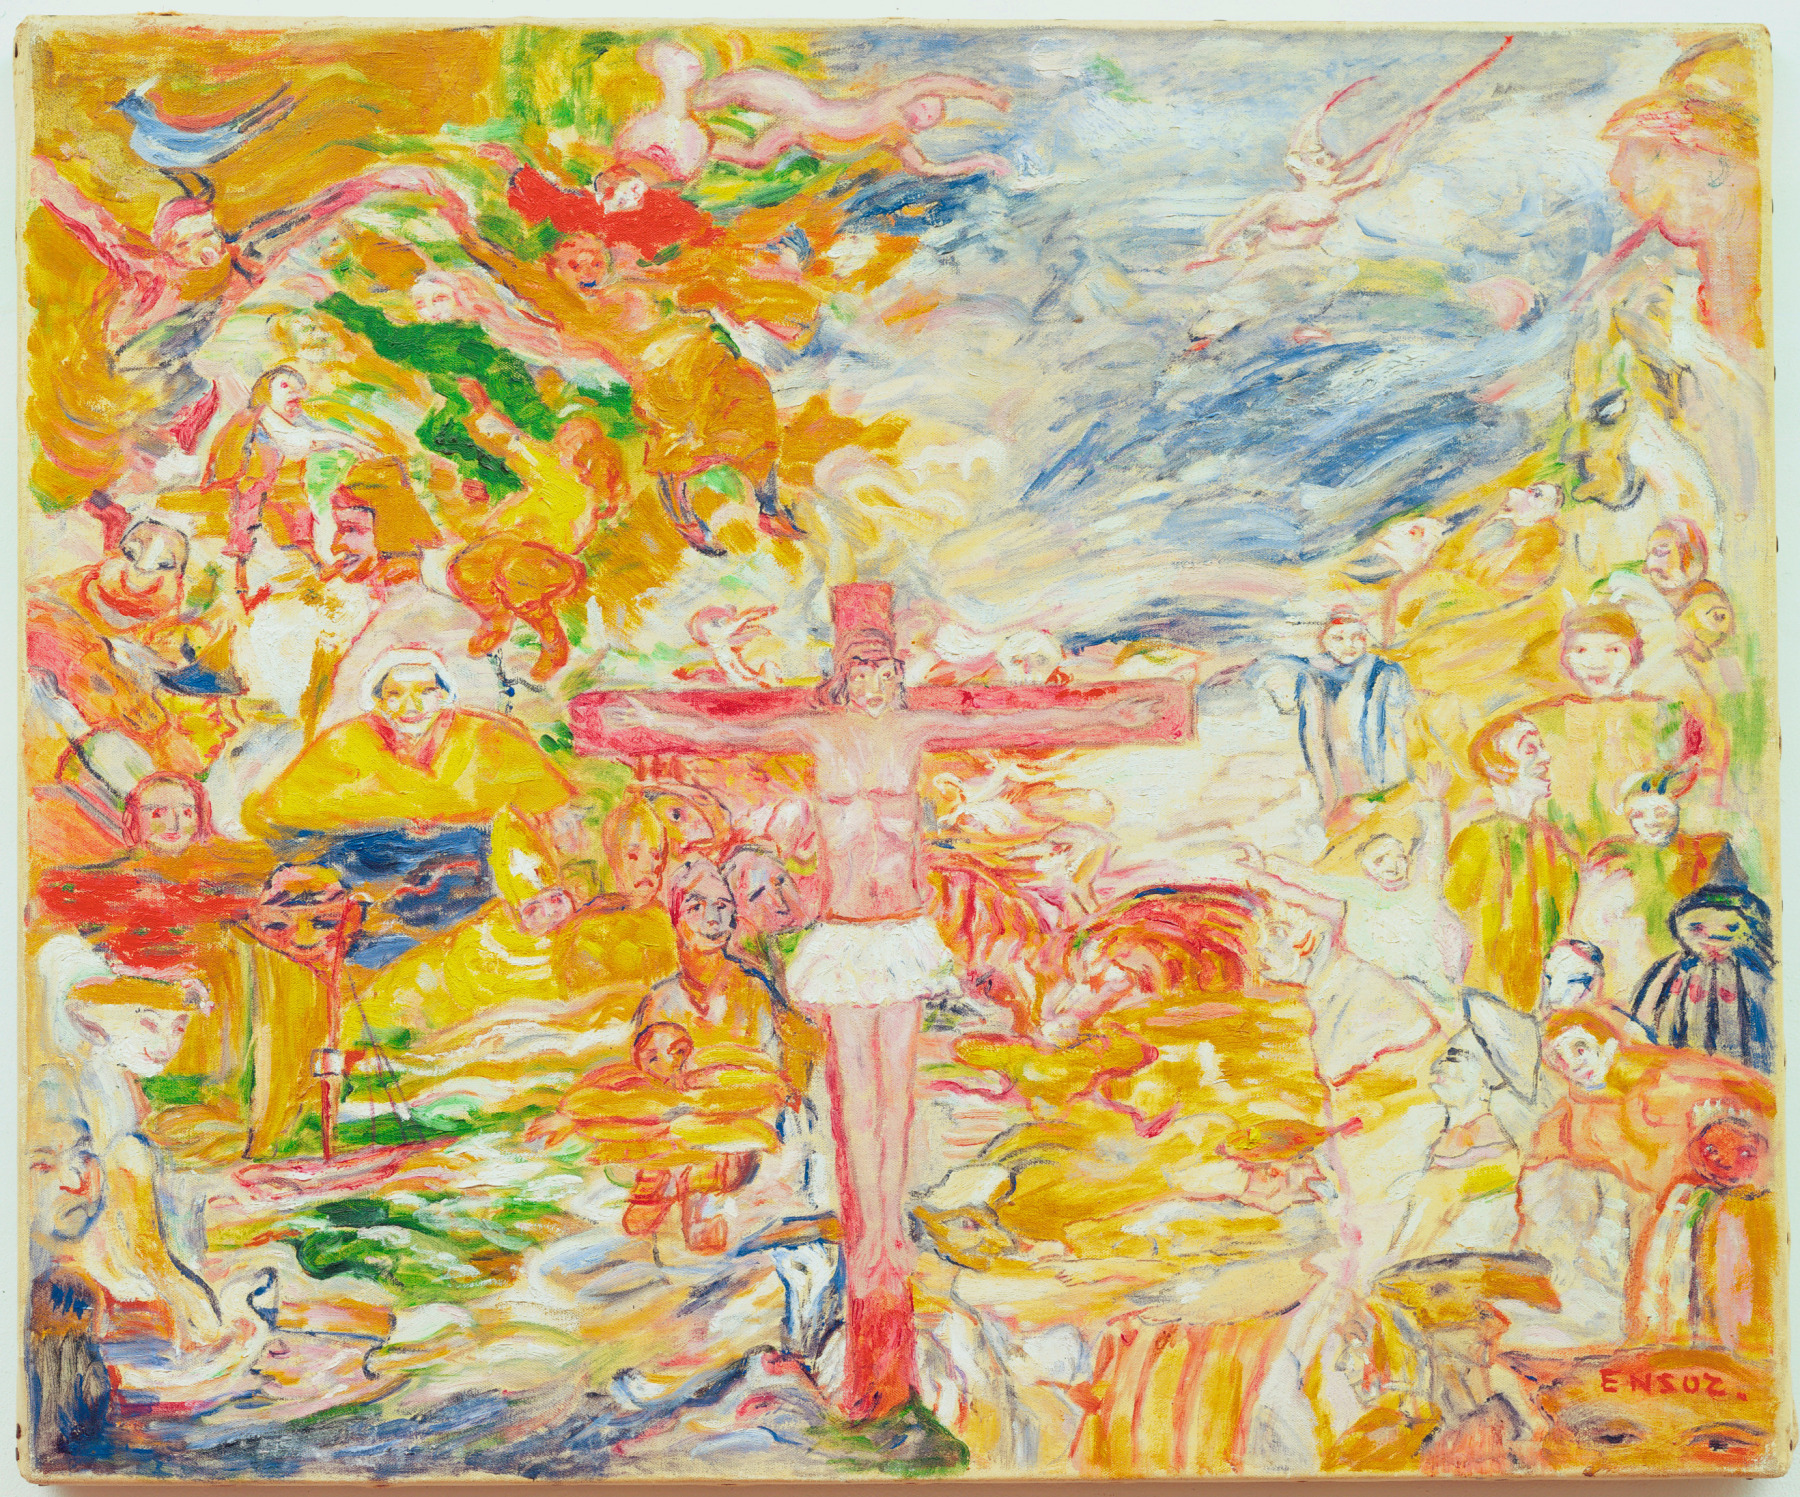 About the Artwork James Ensor. Le Christ Agonisant (christ in Agony).  by James Ensor